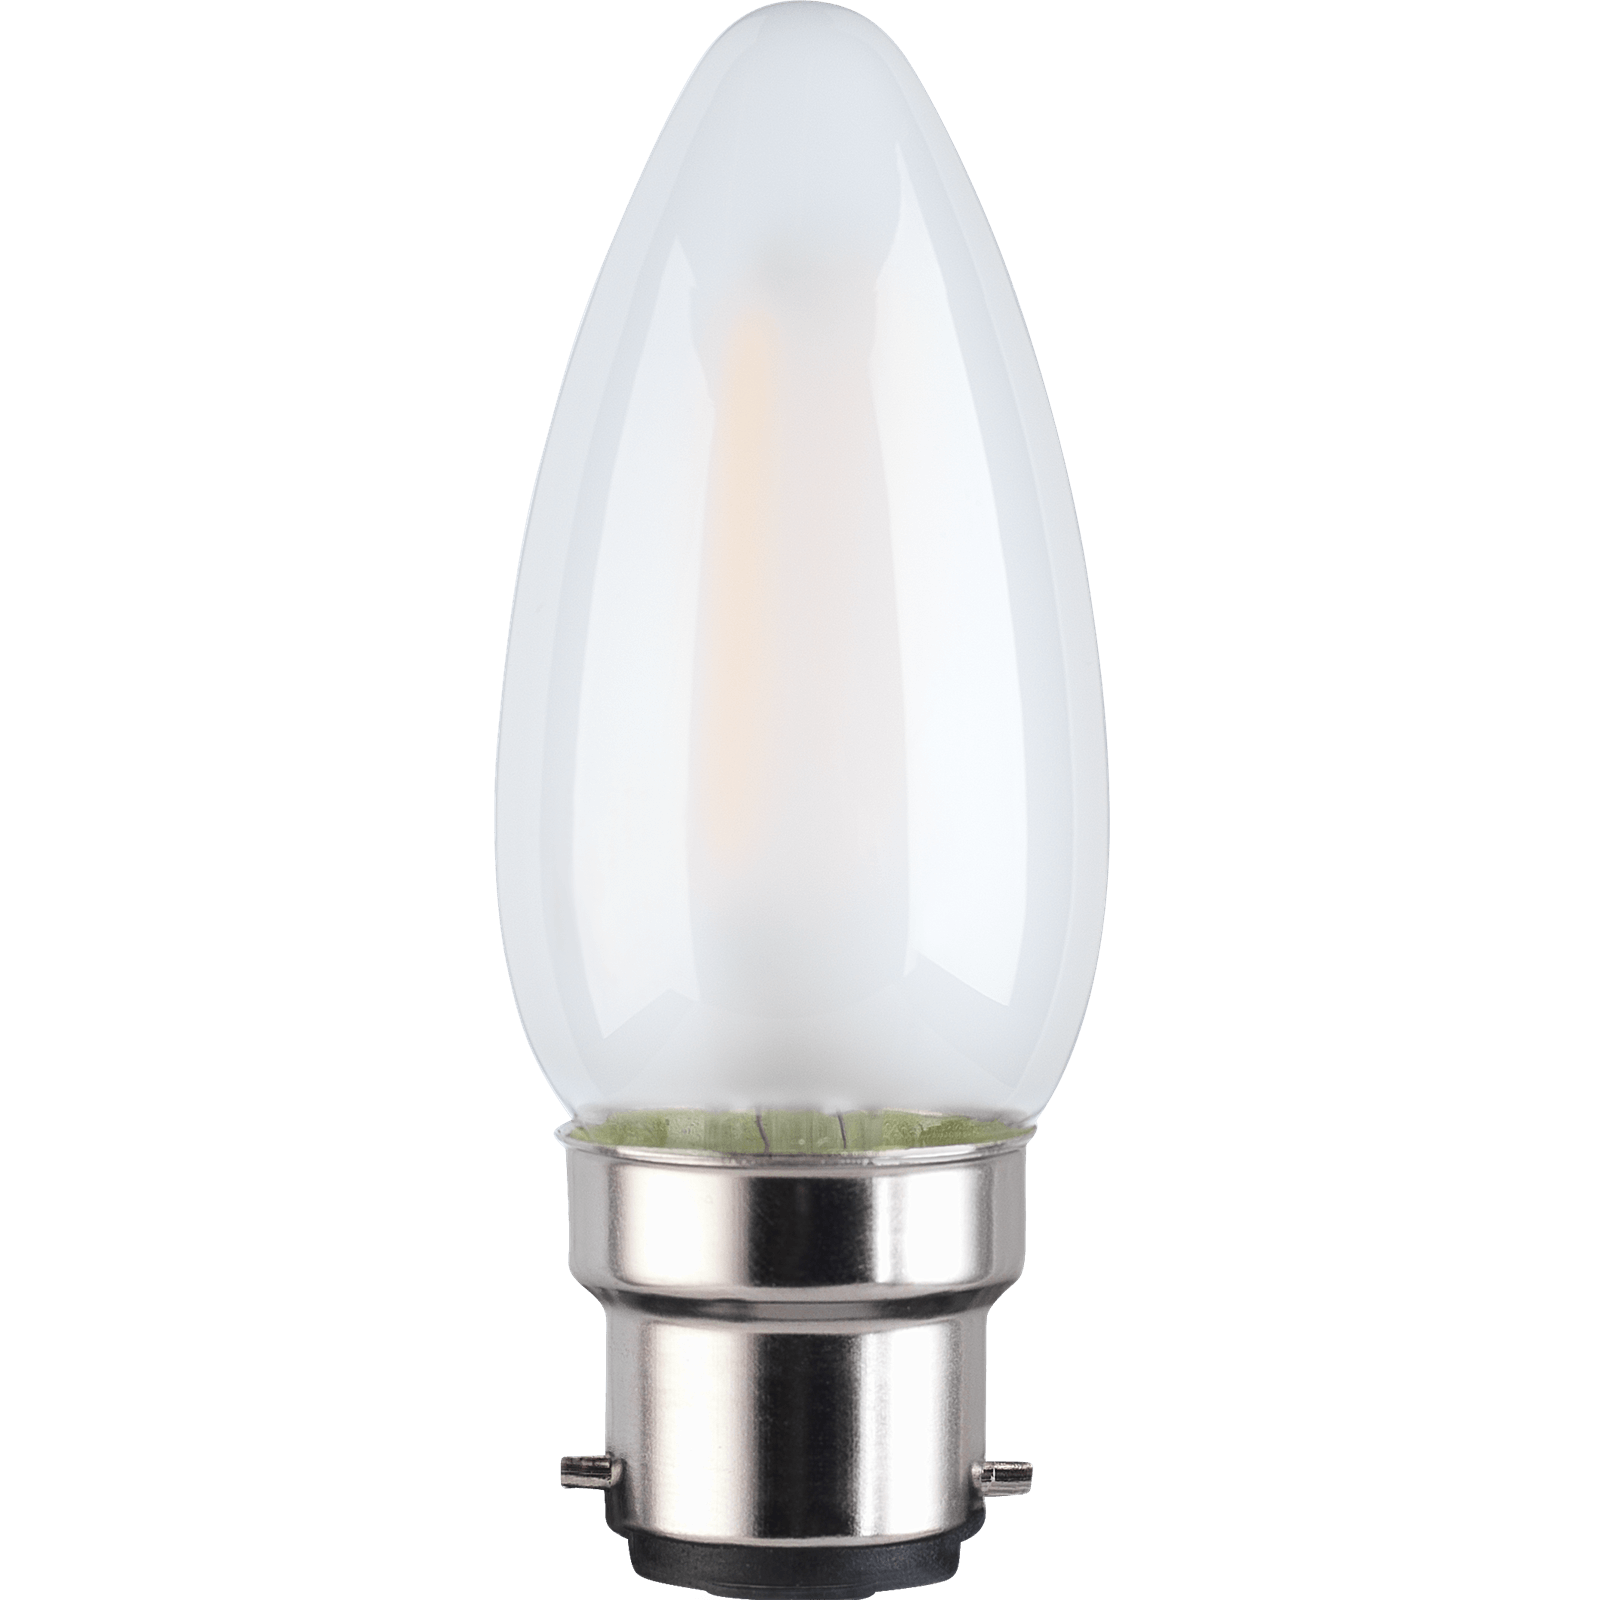 TCP Filament Candle Coat 40W BC Cool Dimmable Light Bulb